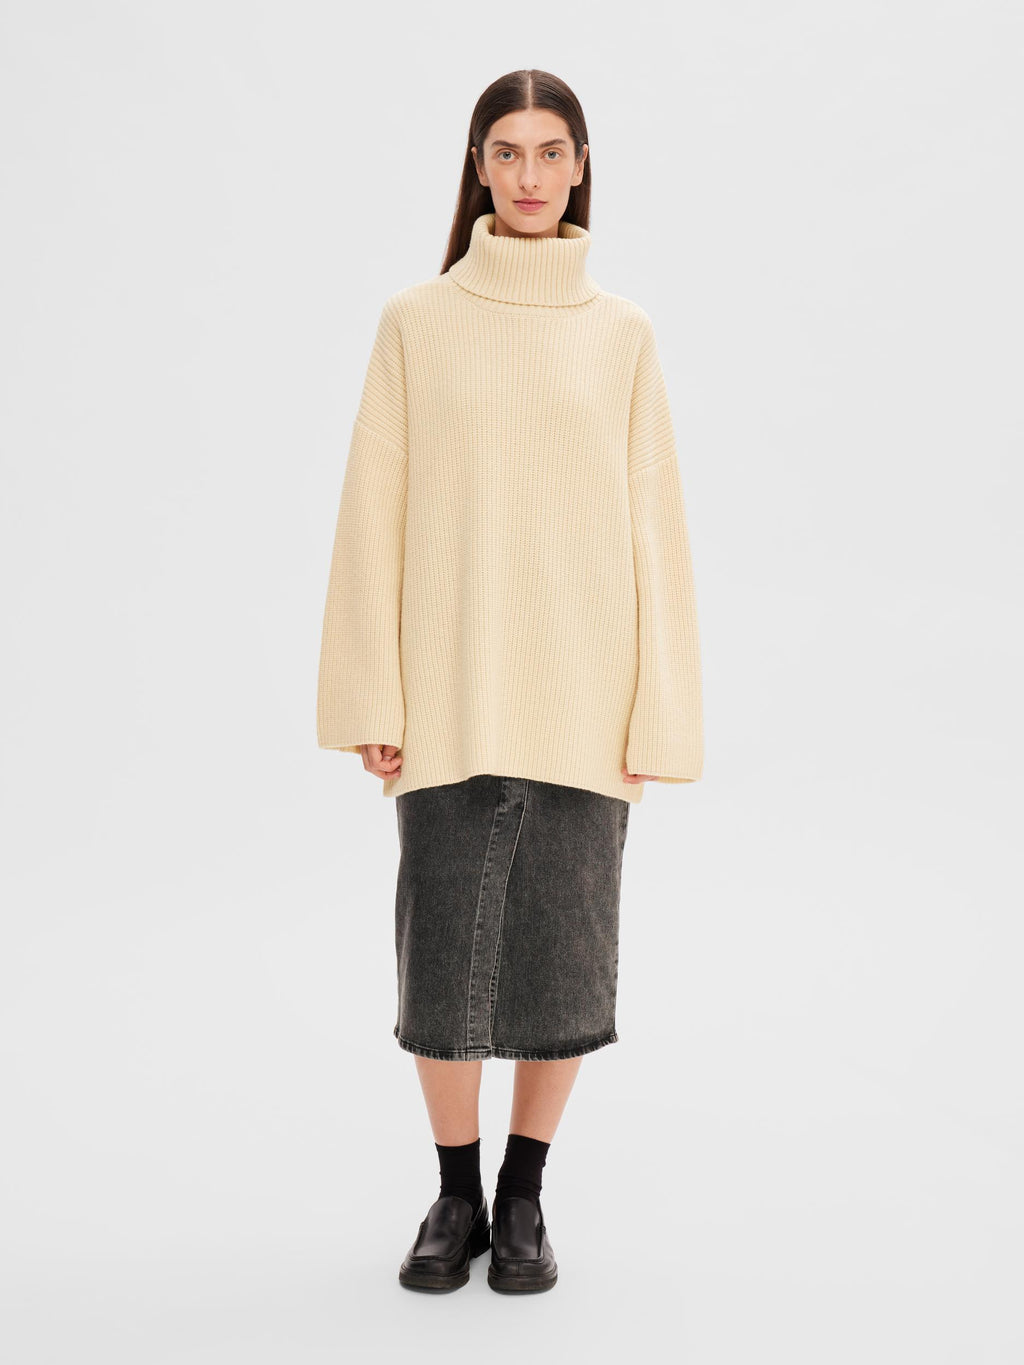 Selected Femme Mary Roll Neck